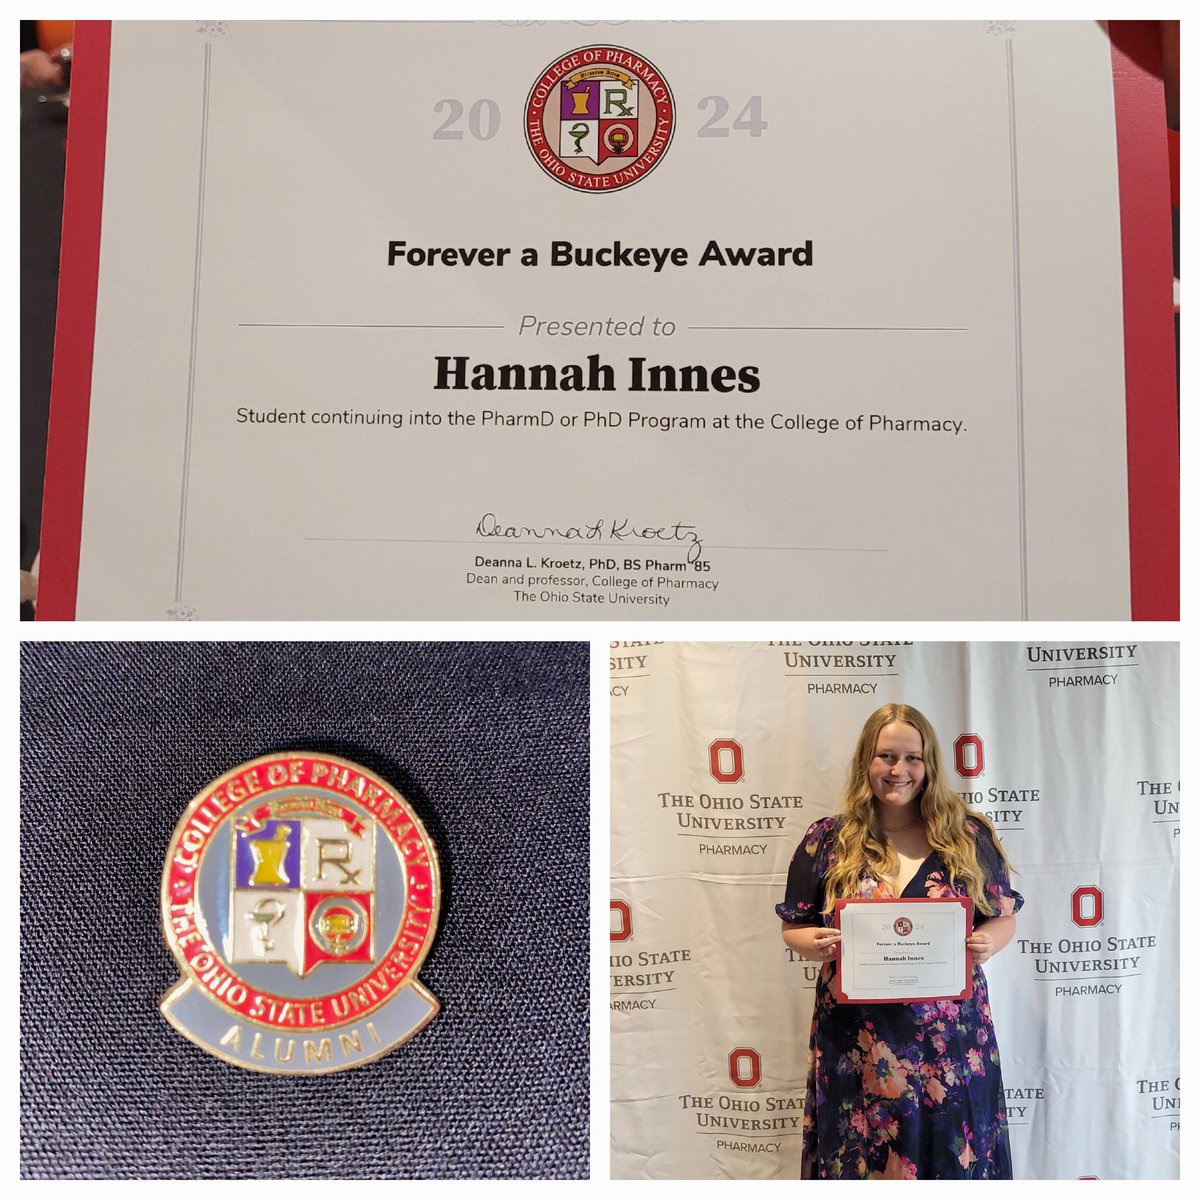 I am so proud of Hannah receiving this award based upon an essay she wrote relating to our family OSU legacy. She just completed her BSPS at OSU!! @osu_pharmacy @wcsdistrict @TBowers3 @PeteScully1 @Hannah_Innes8